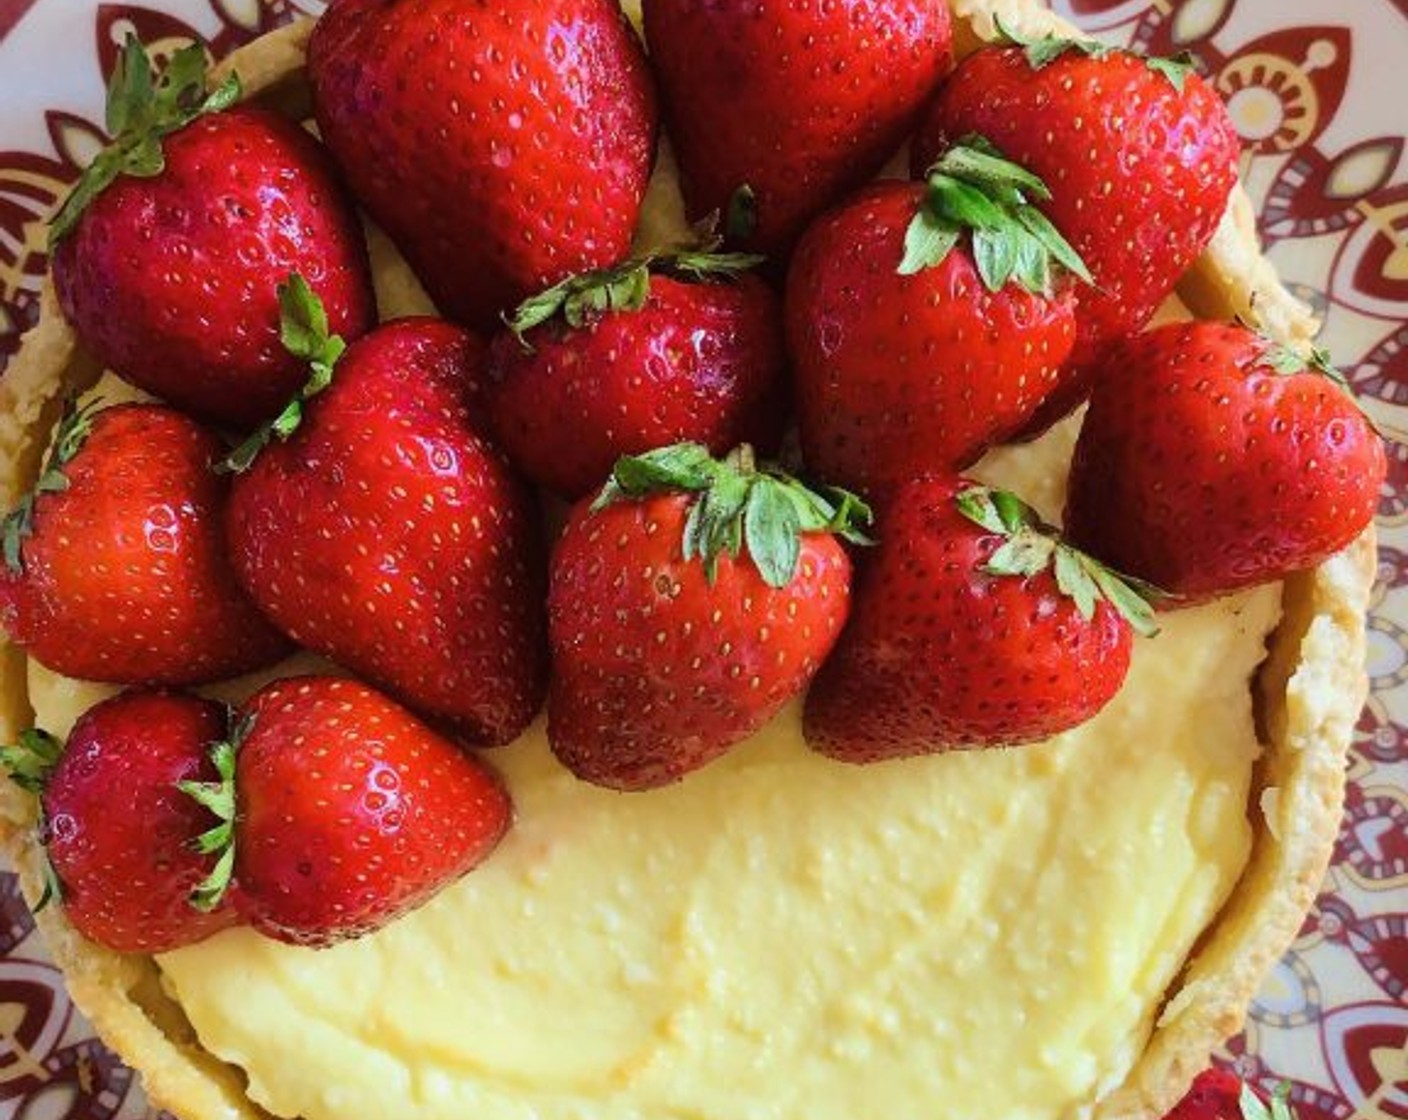 step 12 Use the strawberries with the lemon juice to decorate your cake. Store in your fridge until ready to serve!